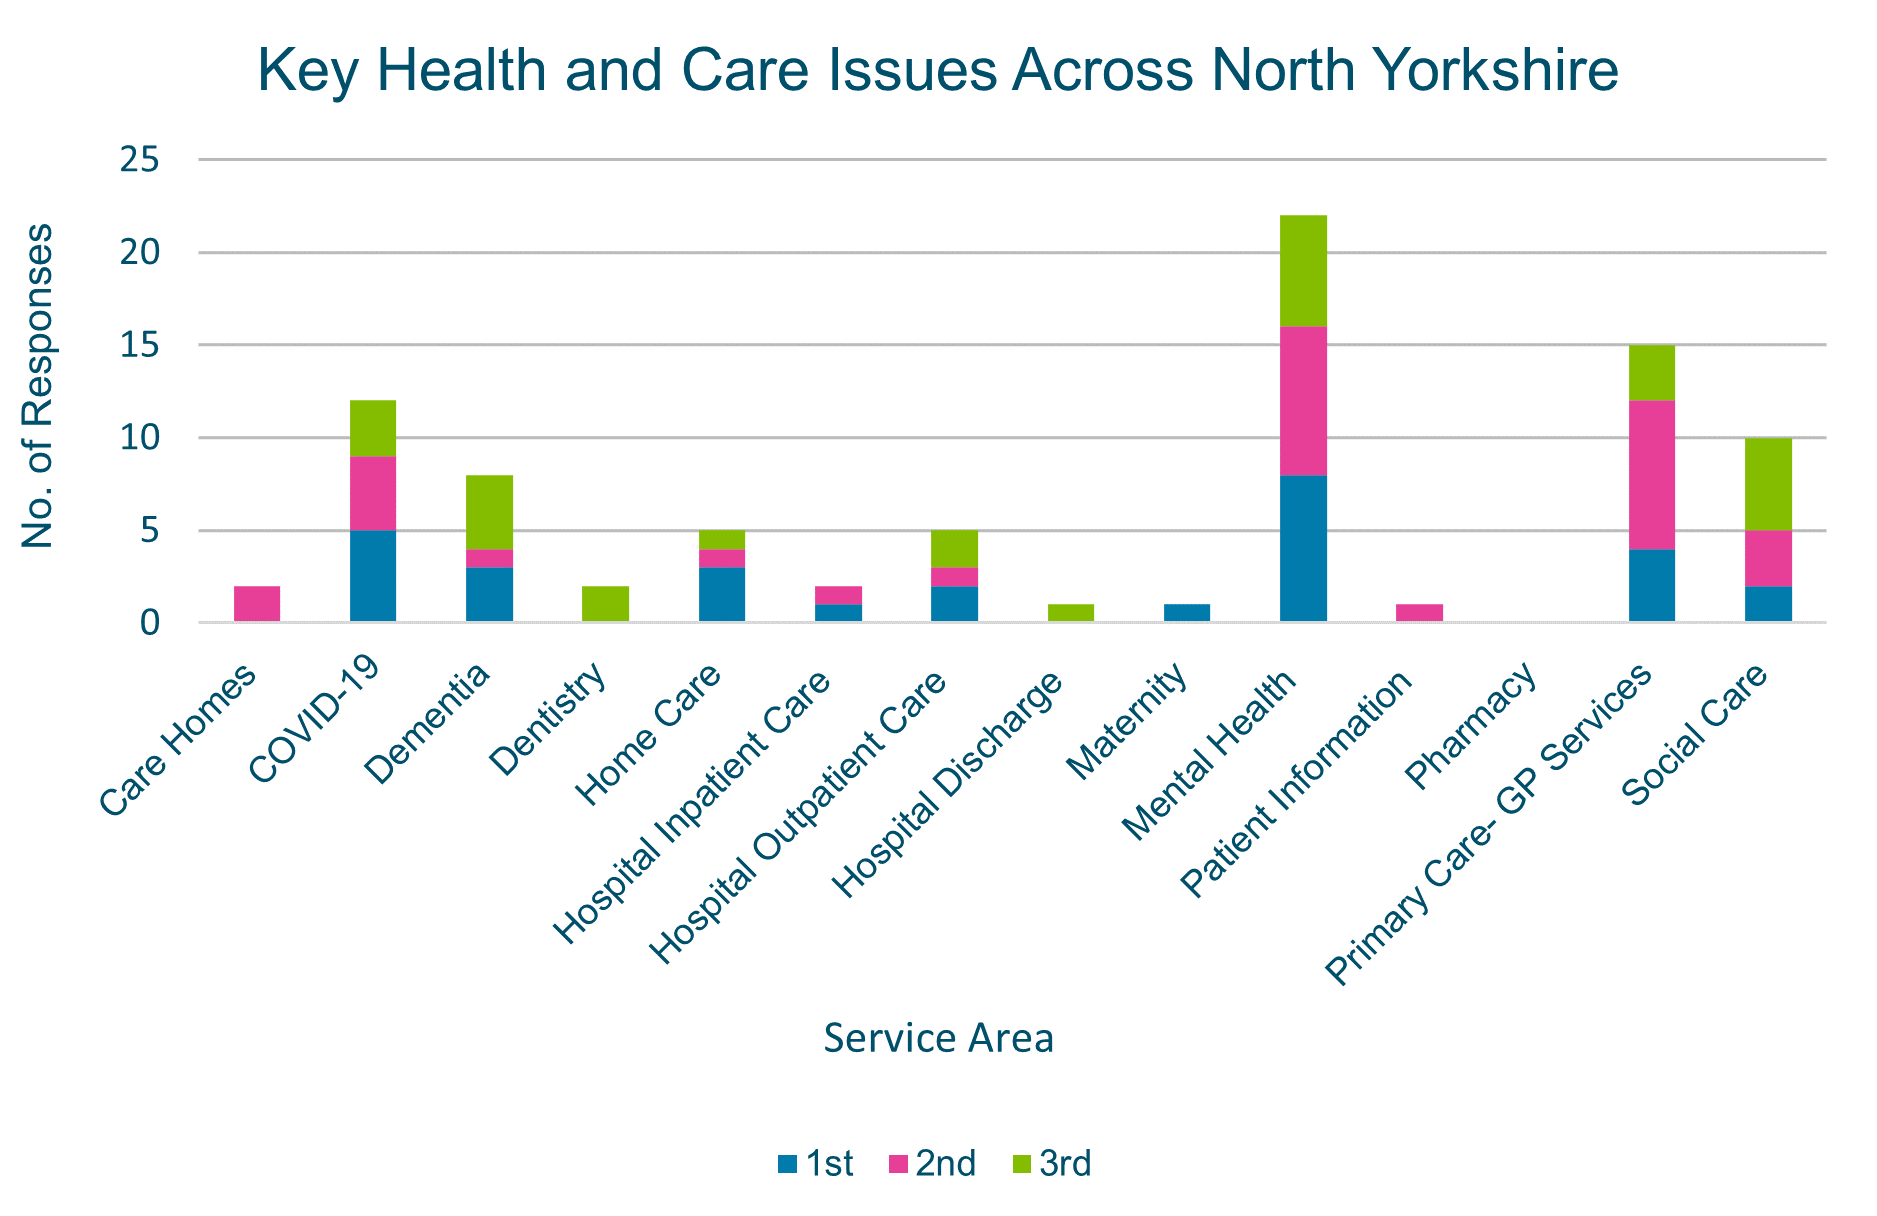 table including key health and care issues